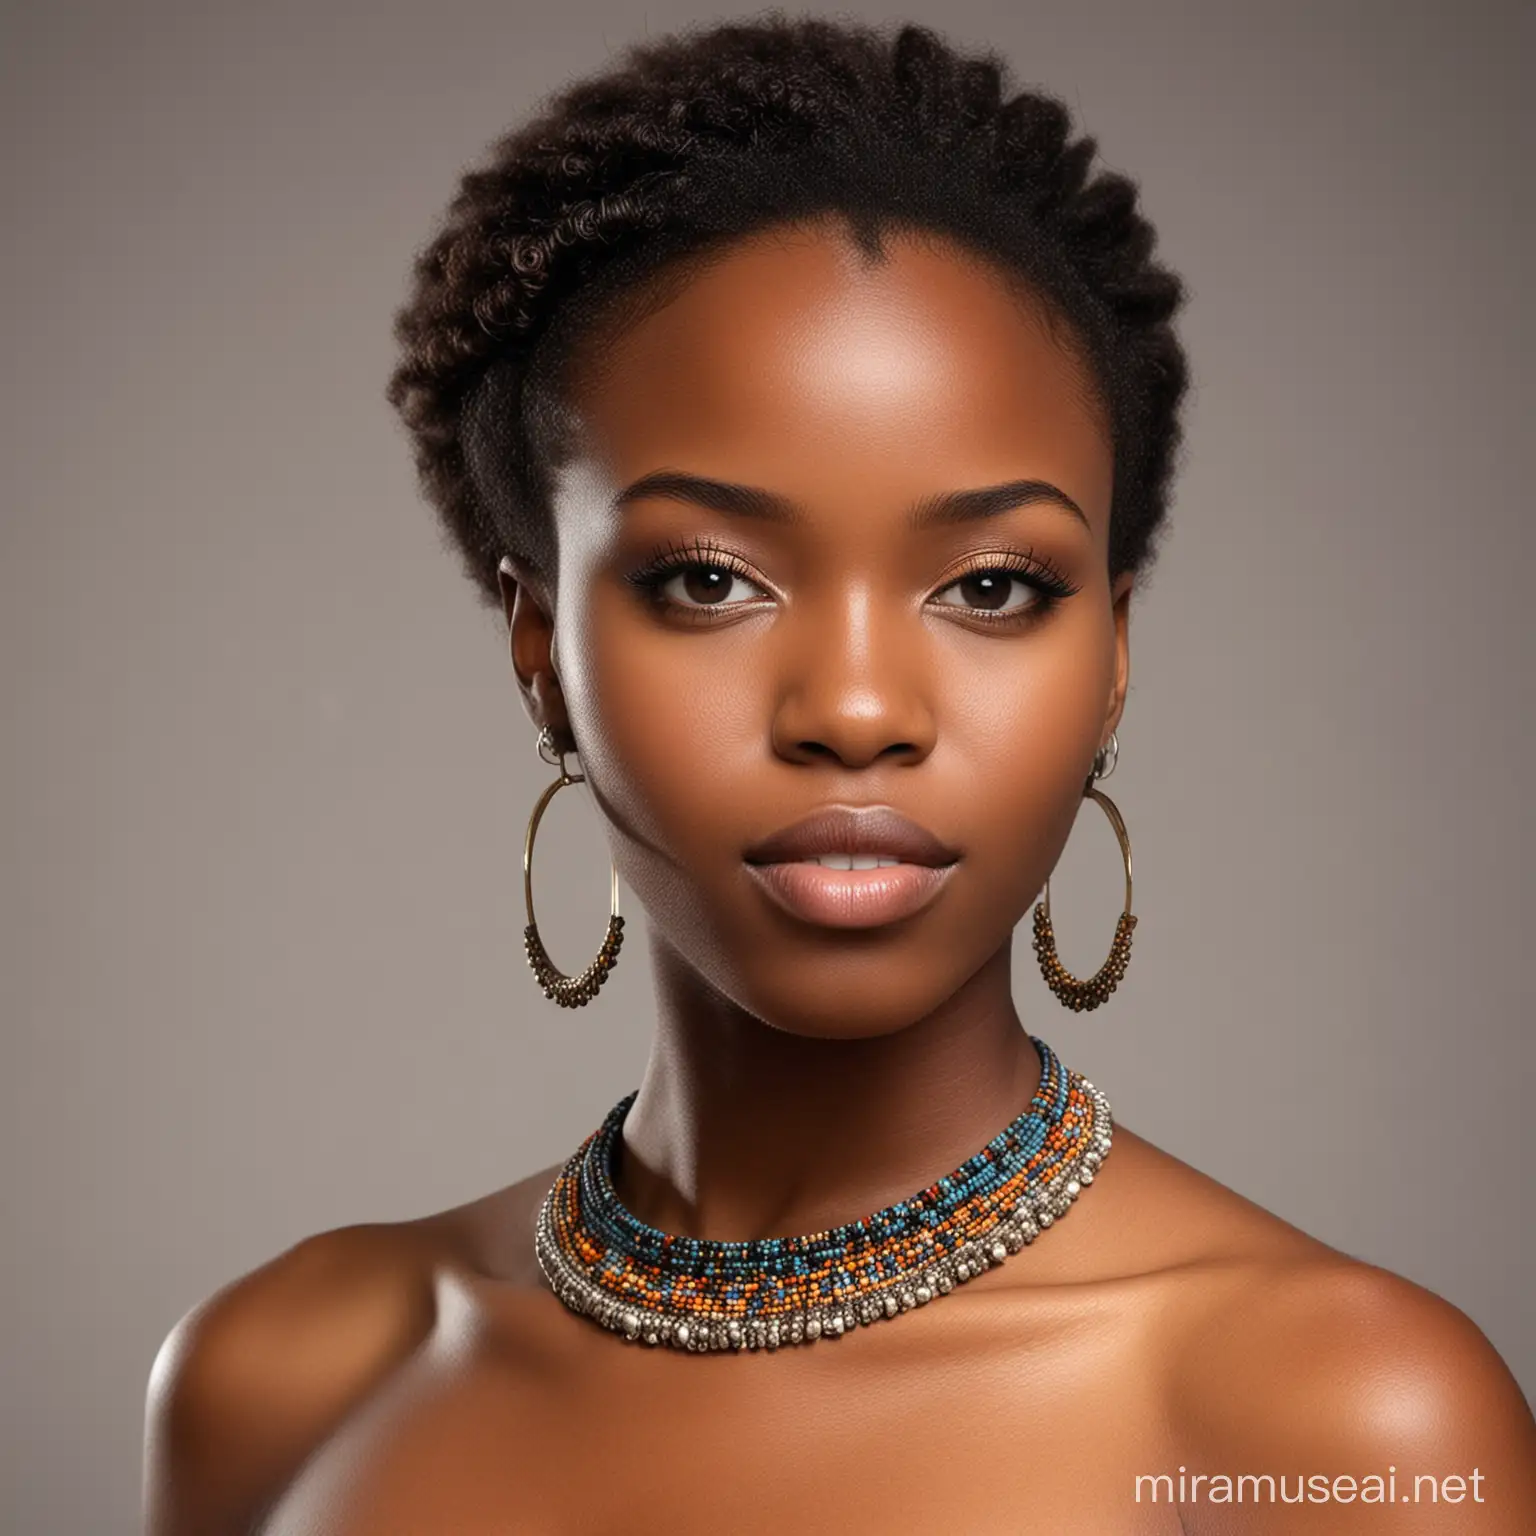 Beautiful Young Black African Woman Portrait